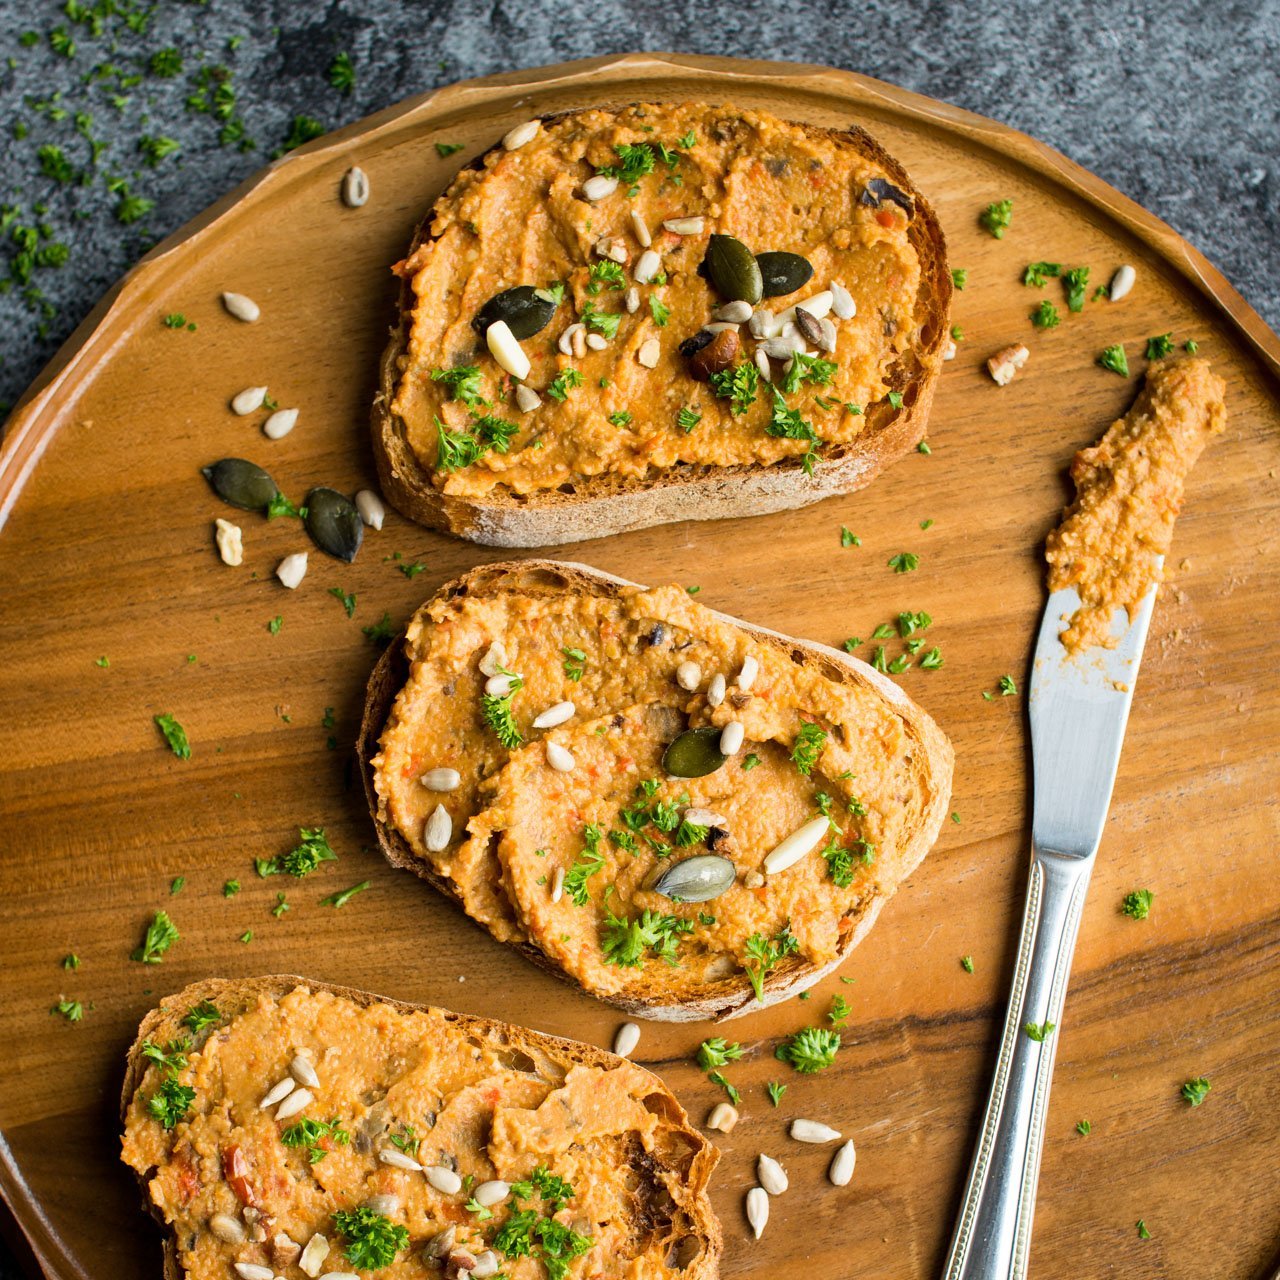 Vegetable Pate Everyone Will Love! - Healthy Green Kitchen